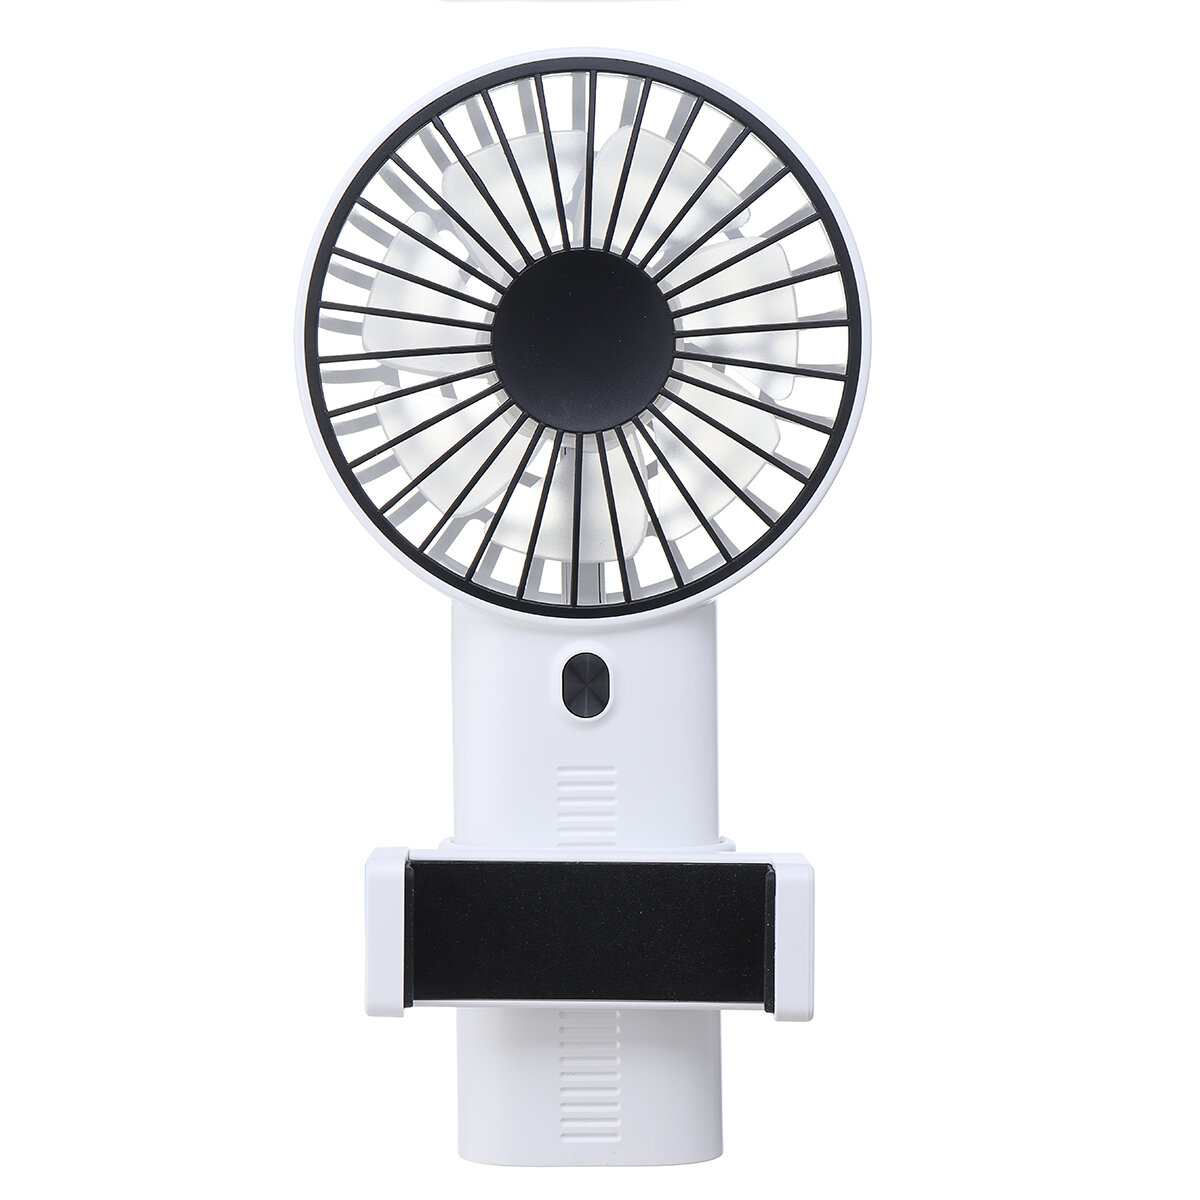 Portable Mini Handheld Desktop Table USB Fan 3 Modes Air Cooling Fan With Phone Holder